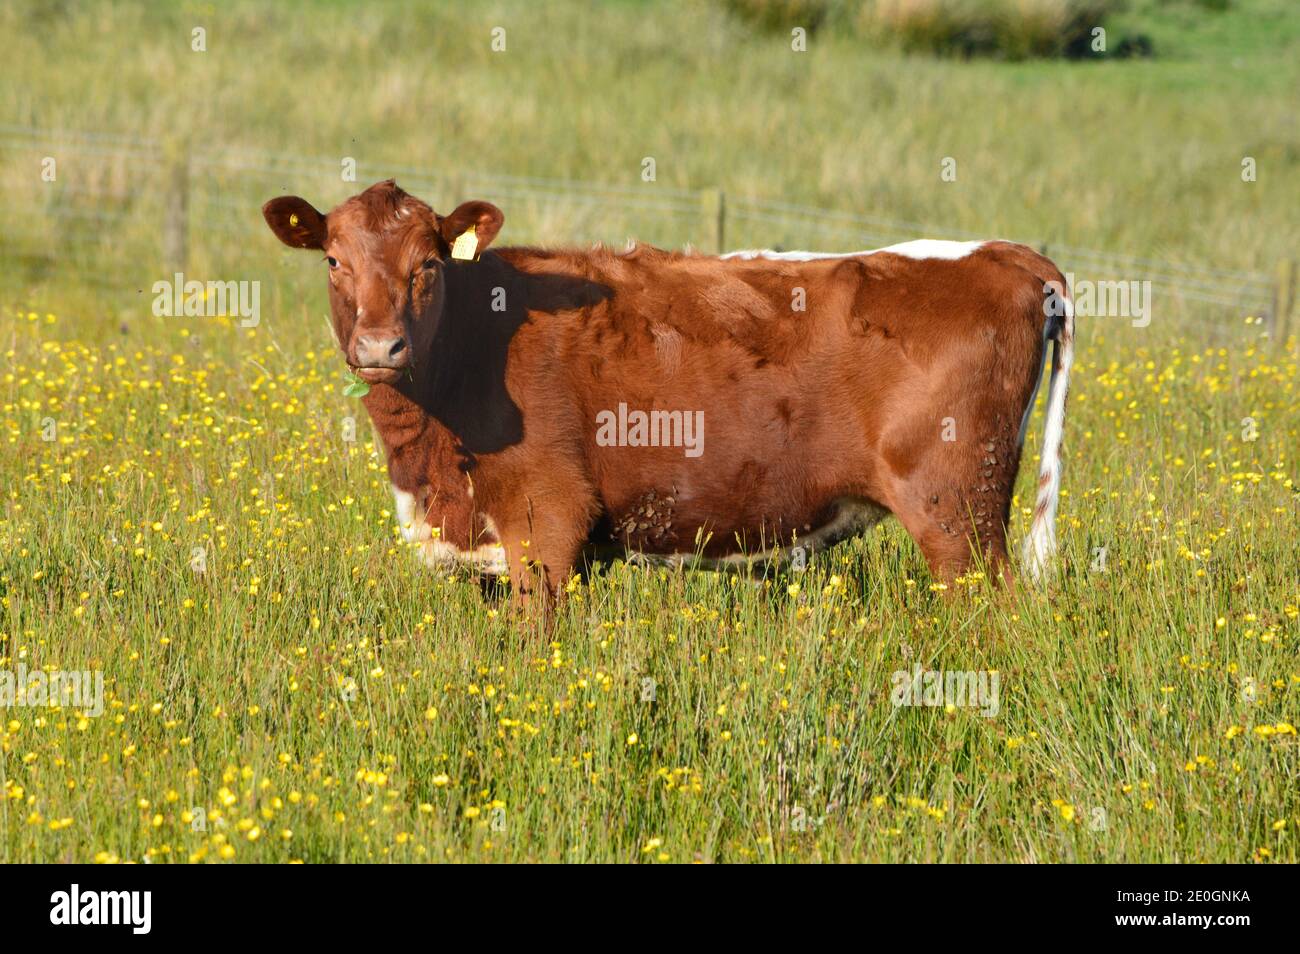 Irish Moiled Cattle in a field on a farm in Co Antrim Northern Ireland Stock Photo